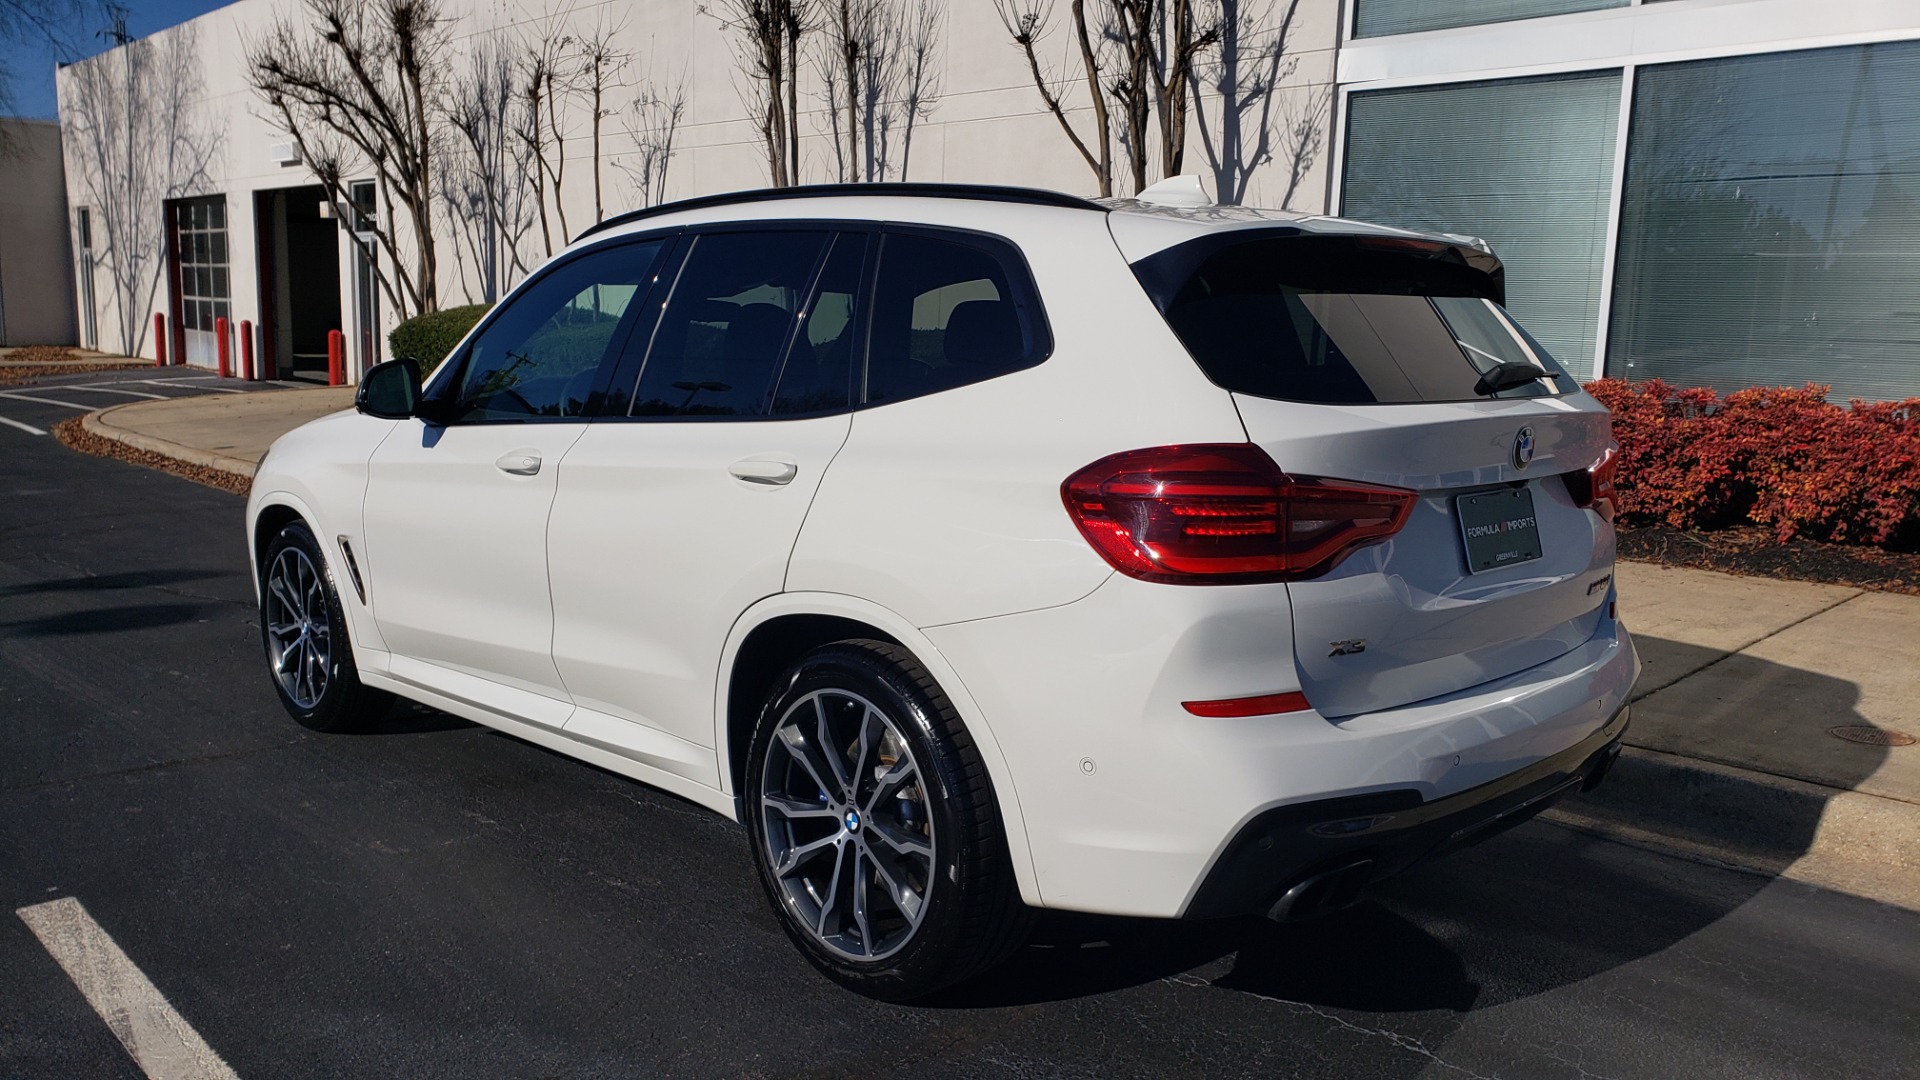 Used 2019 BMW X3 M40I SPORT / NAV / SUNROOF / DRVR ASST / PARK ASST / HTD STS / REARVIEW for sale $53,495 at Formula Imports in Charlotte NC 28227 4